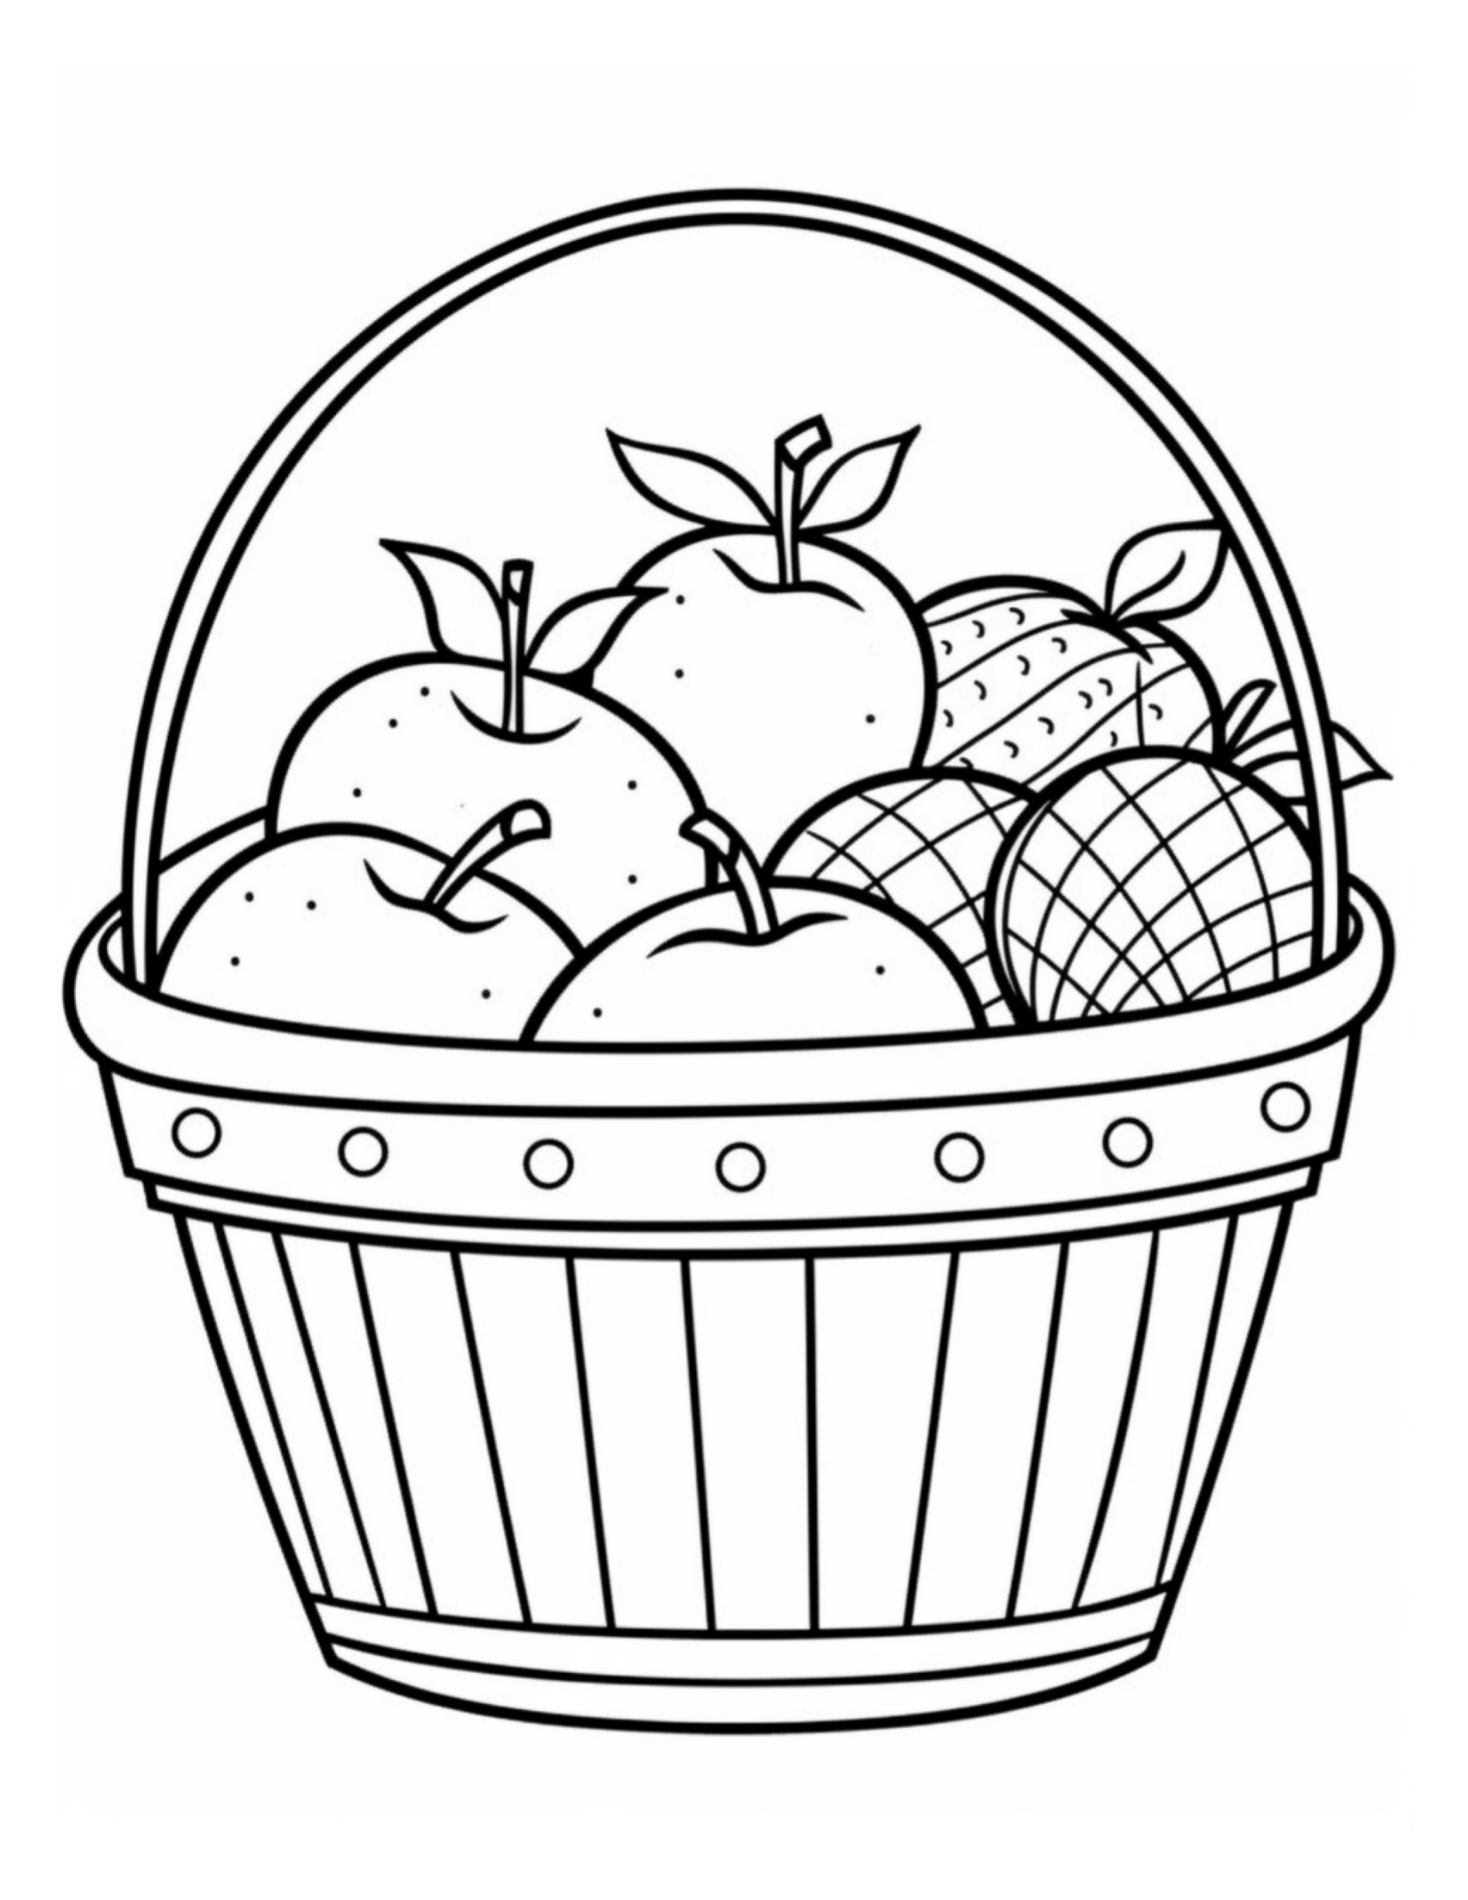 Hand drawn scientific drawing of different fruits in a basket on Craiyon